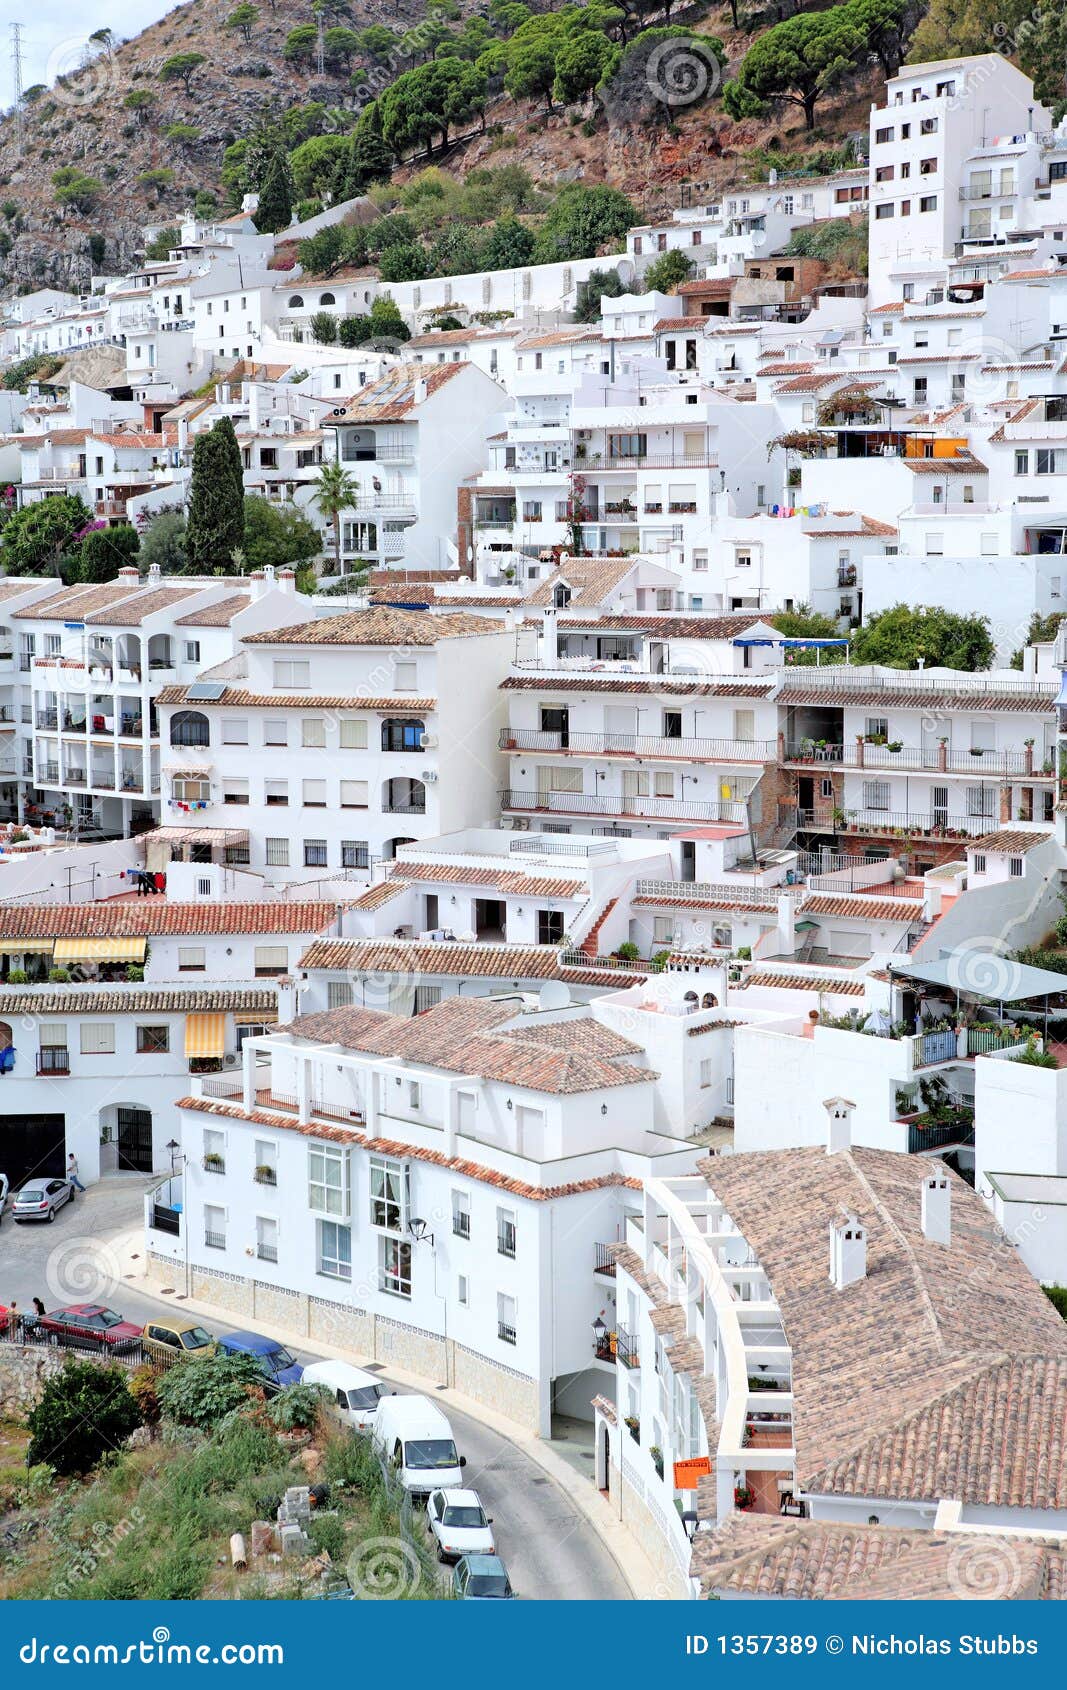 busy, compact town or pueblo of mijas in spain